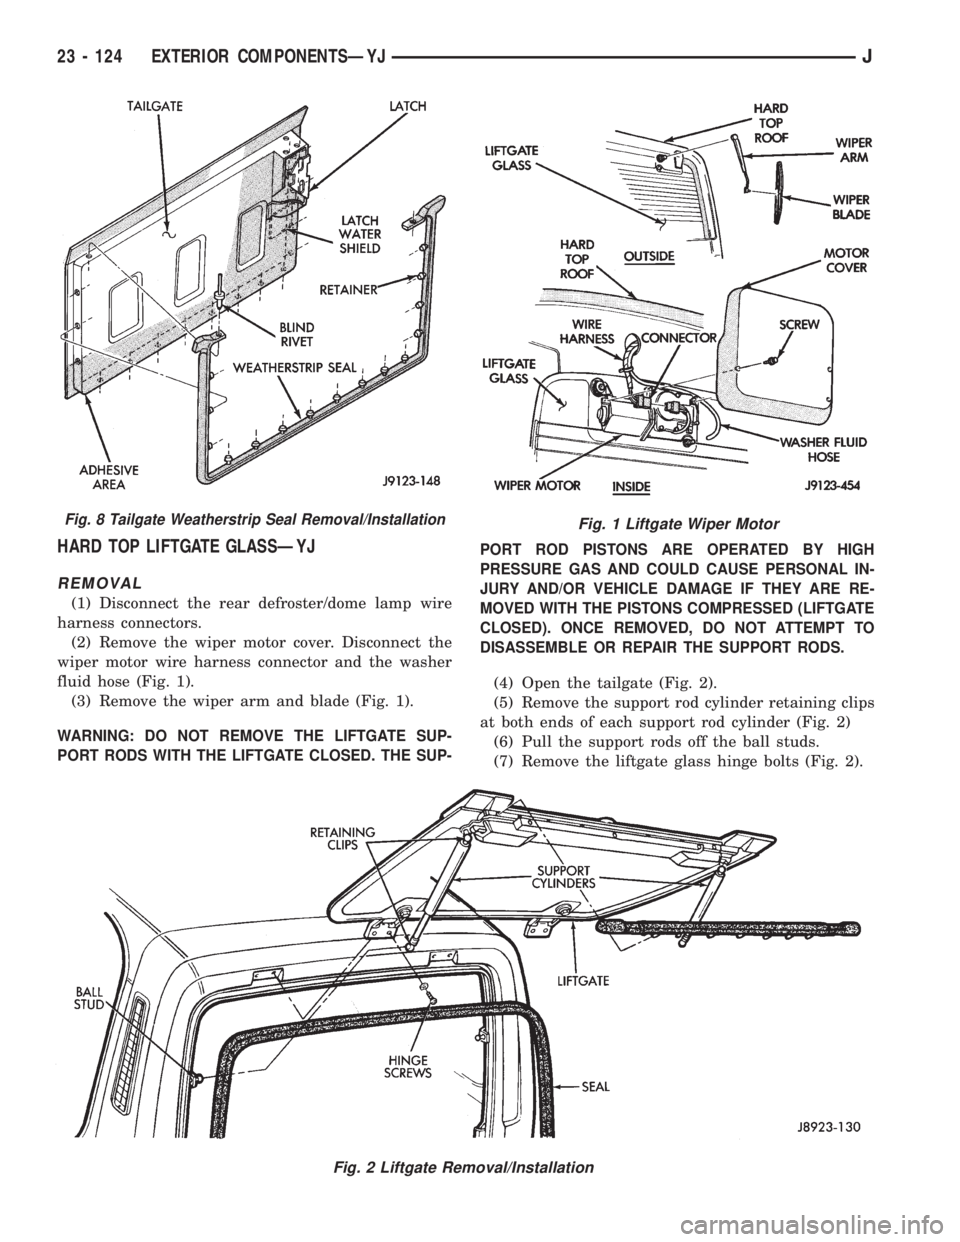 JEEP WRANGLER 1995  Owners Manual Fig. 2 Liftgate Removal/Installation
Fig. 8 Tailgate Weatherstrip Seal Removal/Installation
23 - 124 EXTERIOR COMPONENTSÐYJJ 